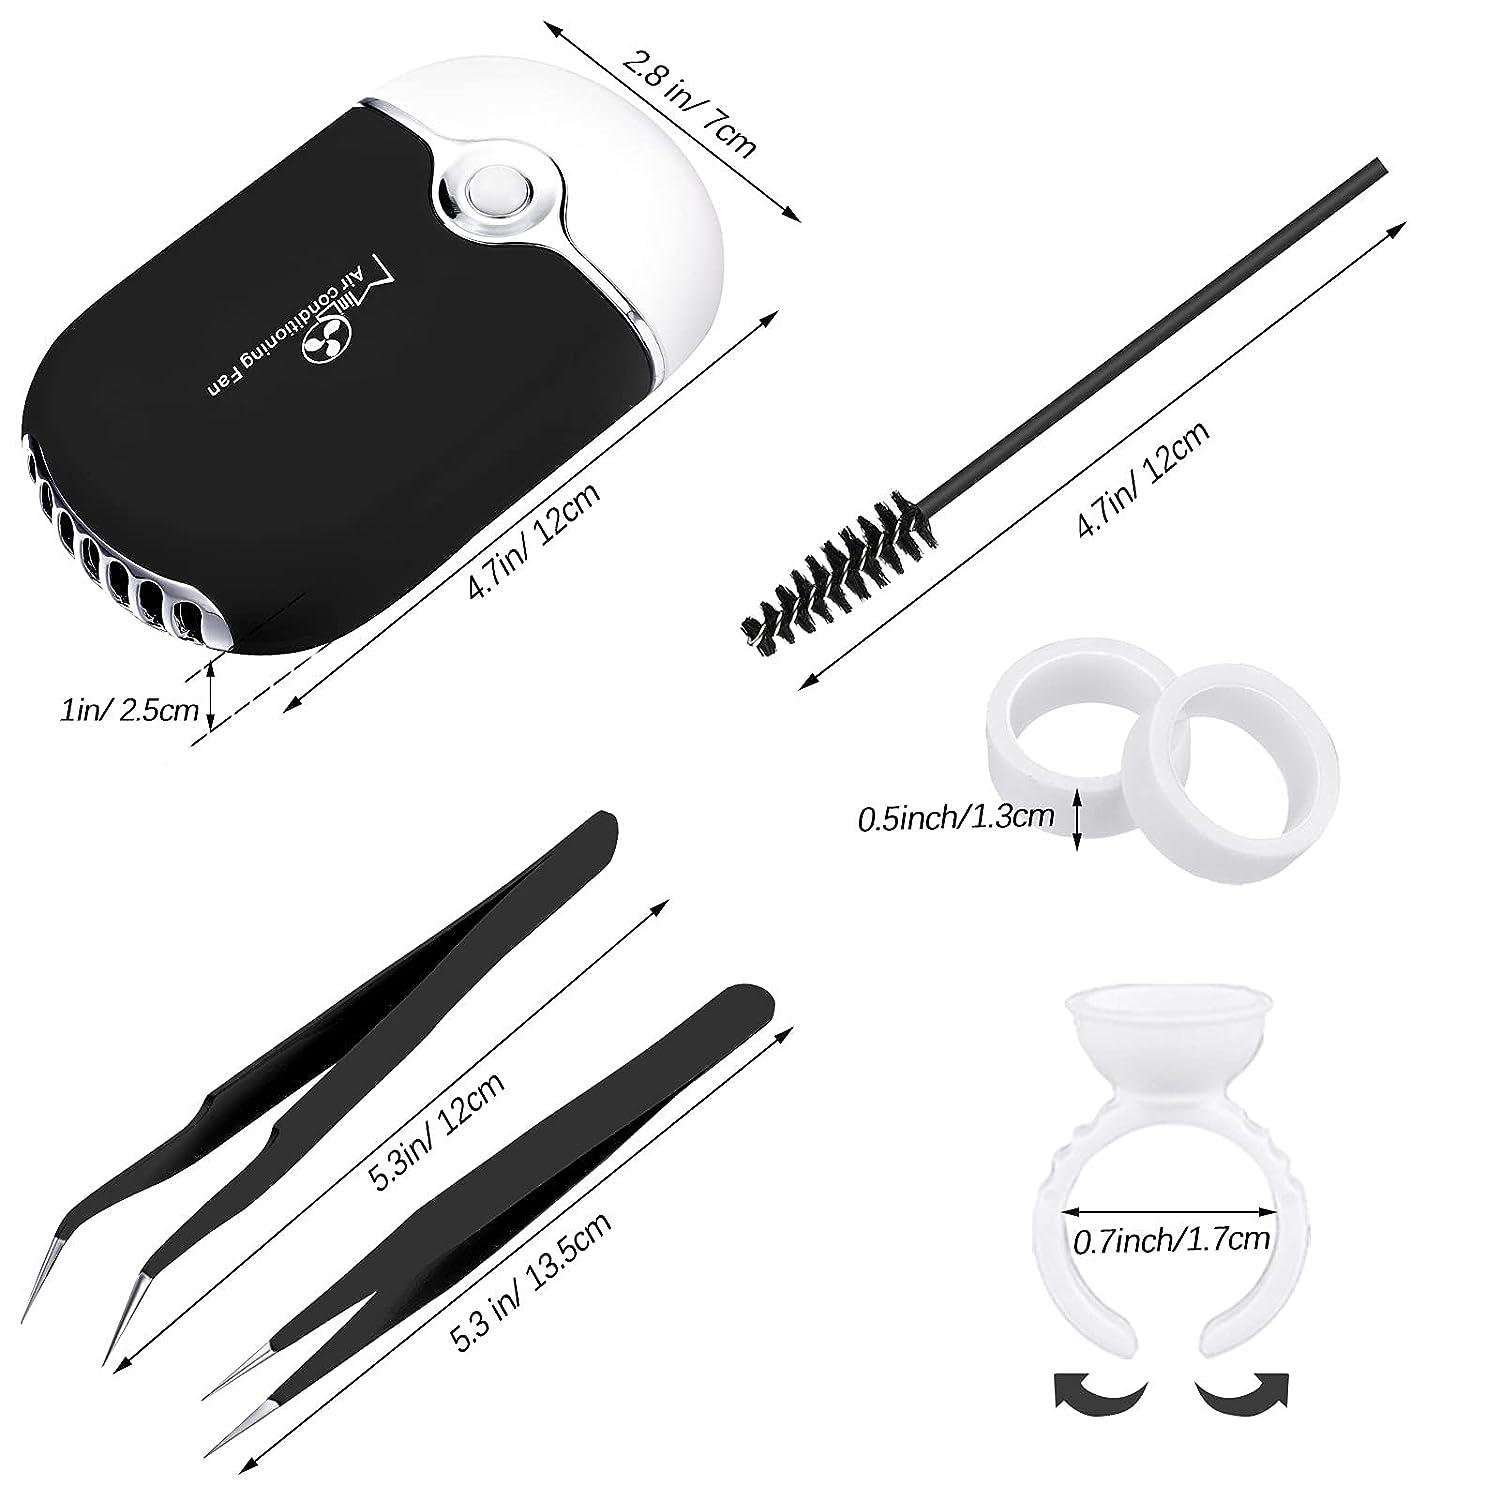  Honoson Eyelash Extension Supplies, USB Air Conditioning  Blower, 2 Straight and Curved Tweezers,100 Disposable Mascara, 50 Glue Ring  Holder, 2 Tapes, 10 Pairs Under Eye Gel Pads (Pink) : Beauty & Personal Care